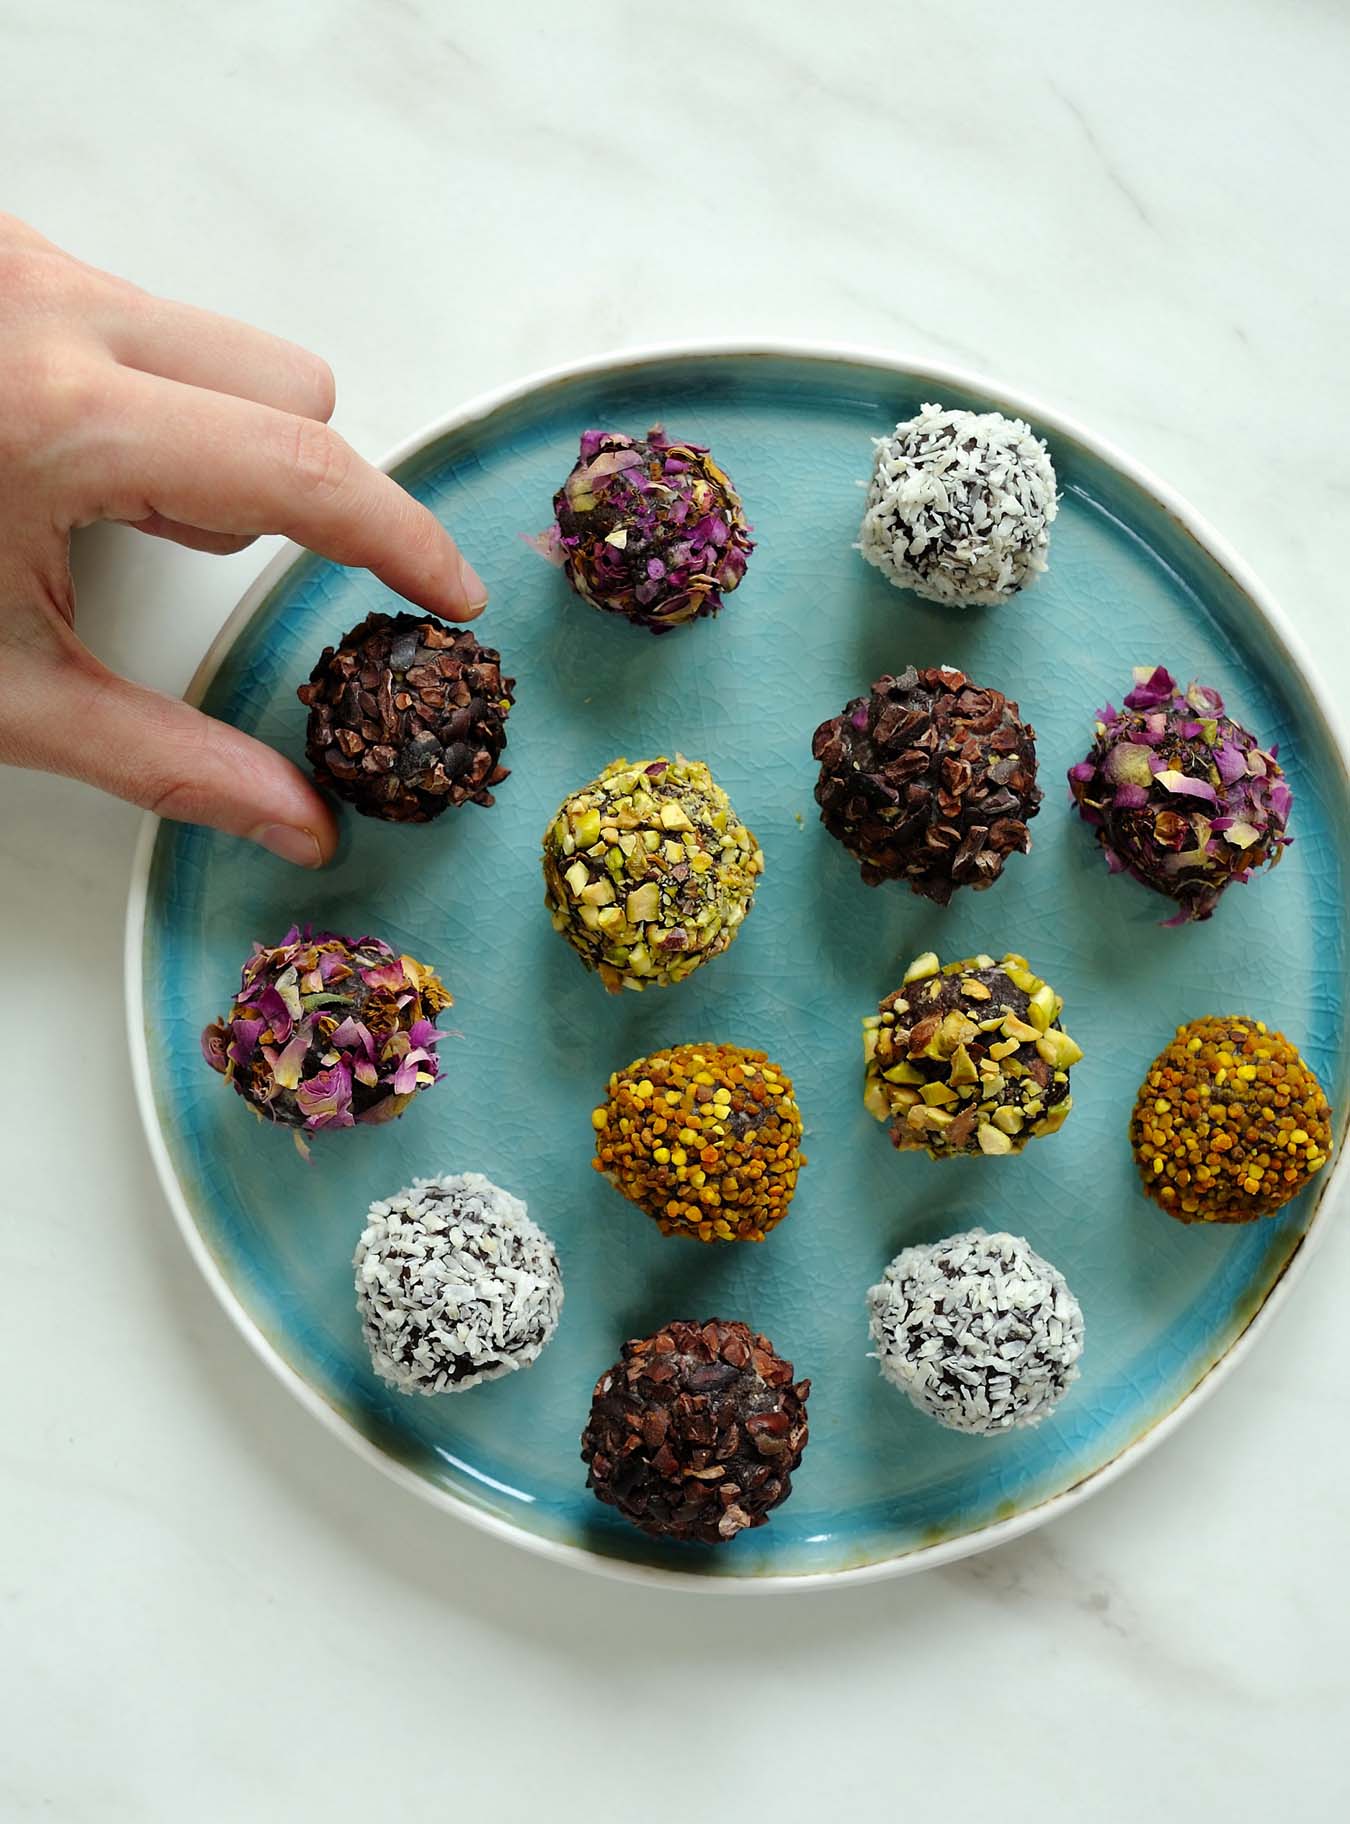 hand takes chocolate truffle from plate full of colorful truffles